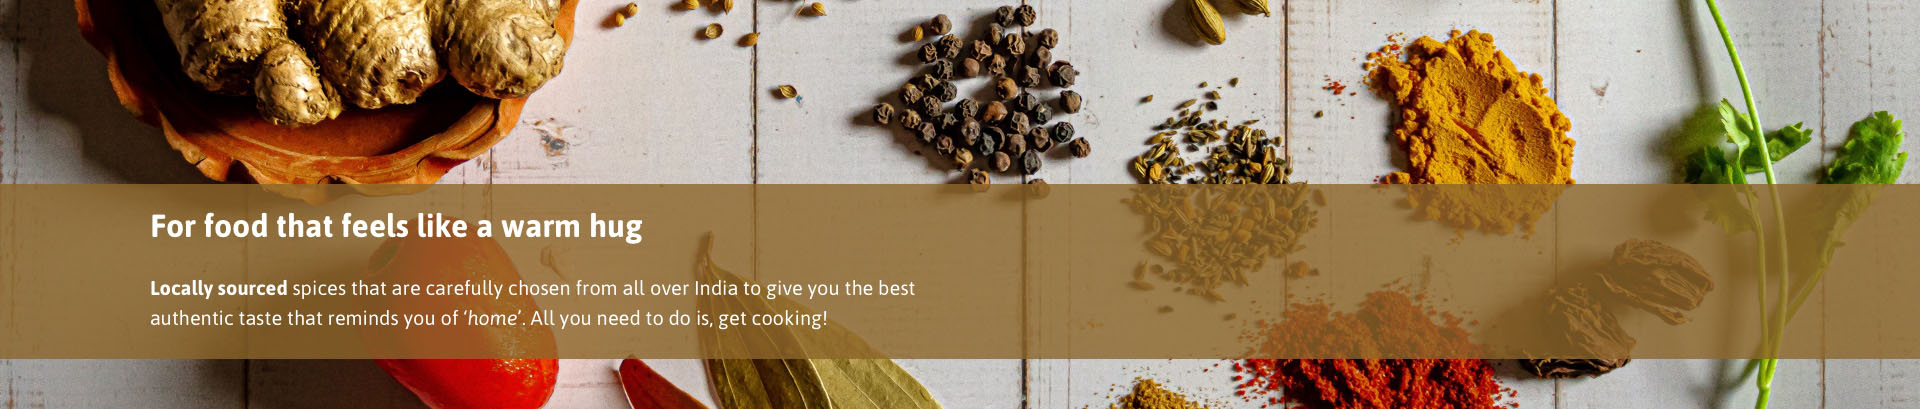 Food for thought - Spices Banner